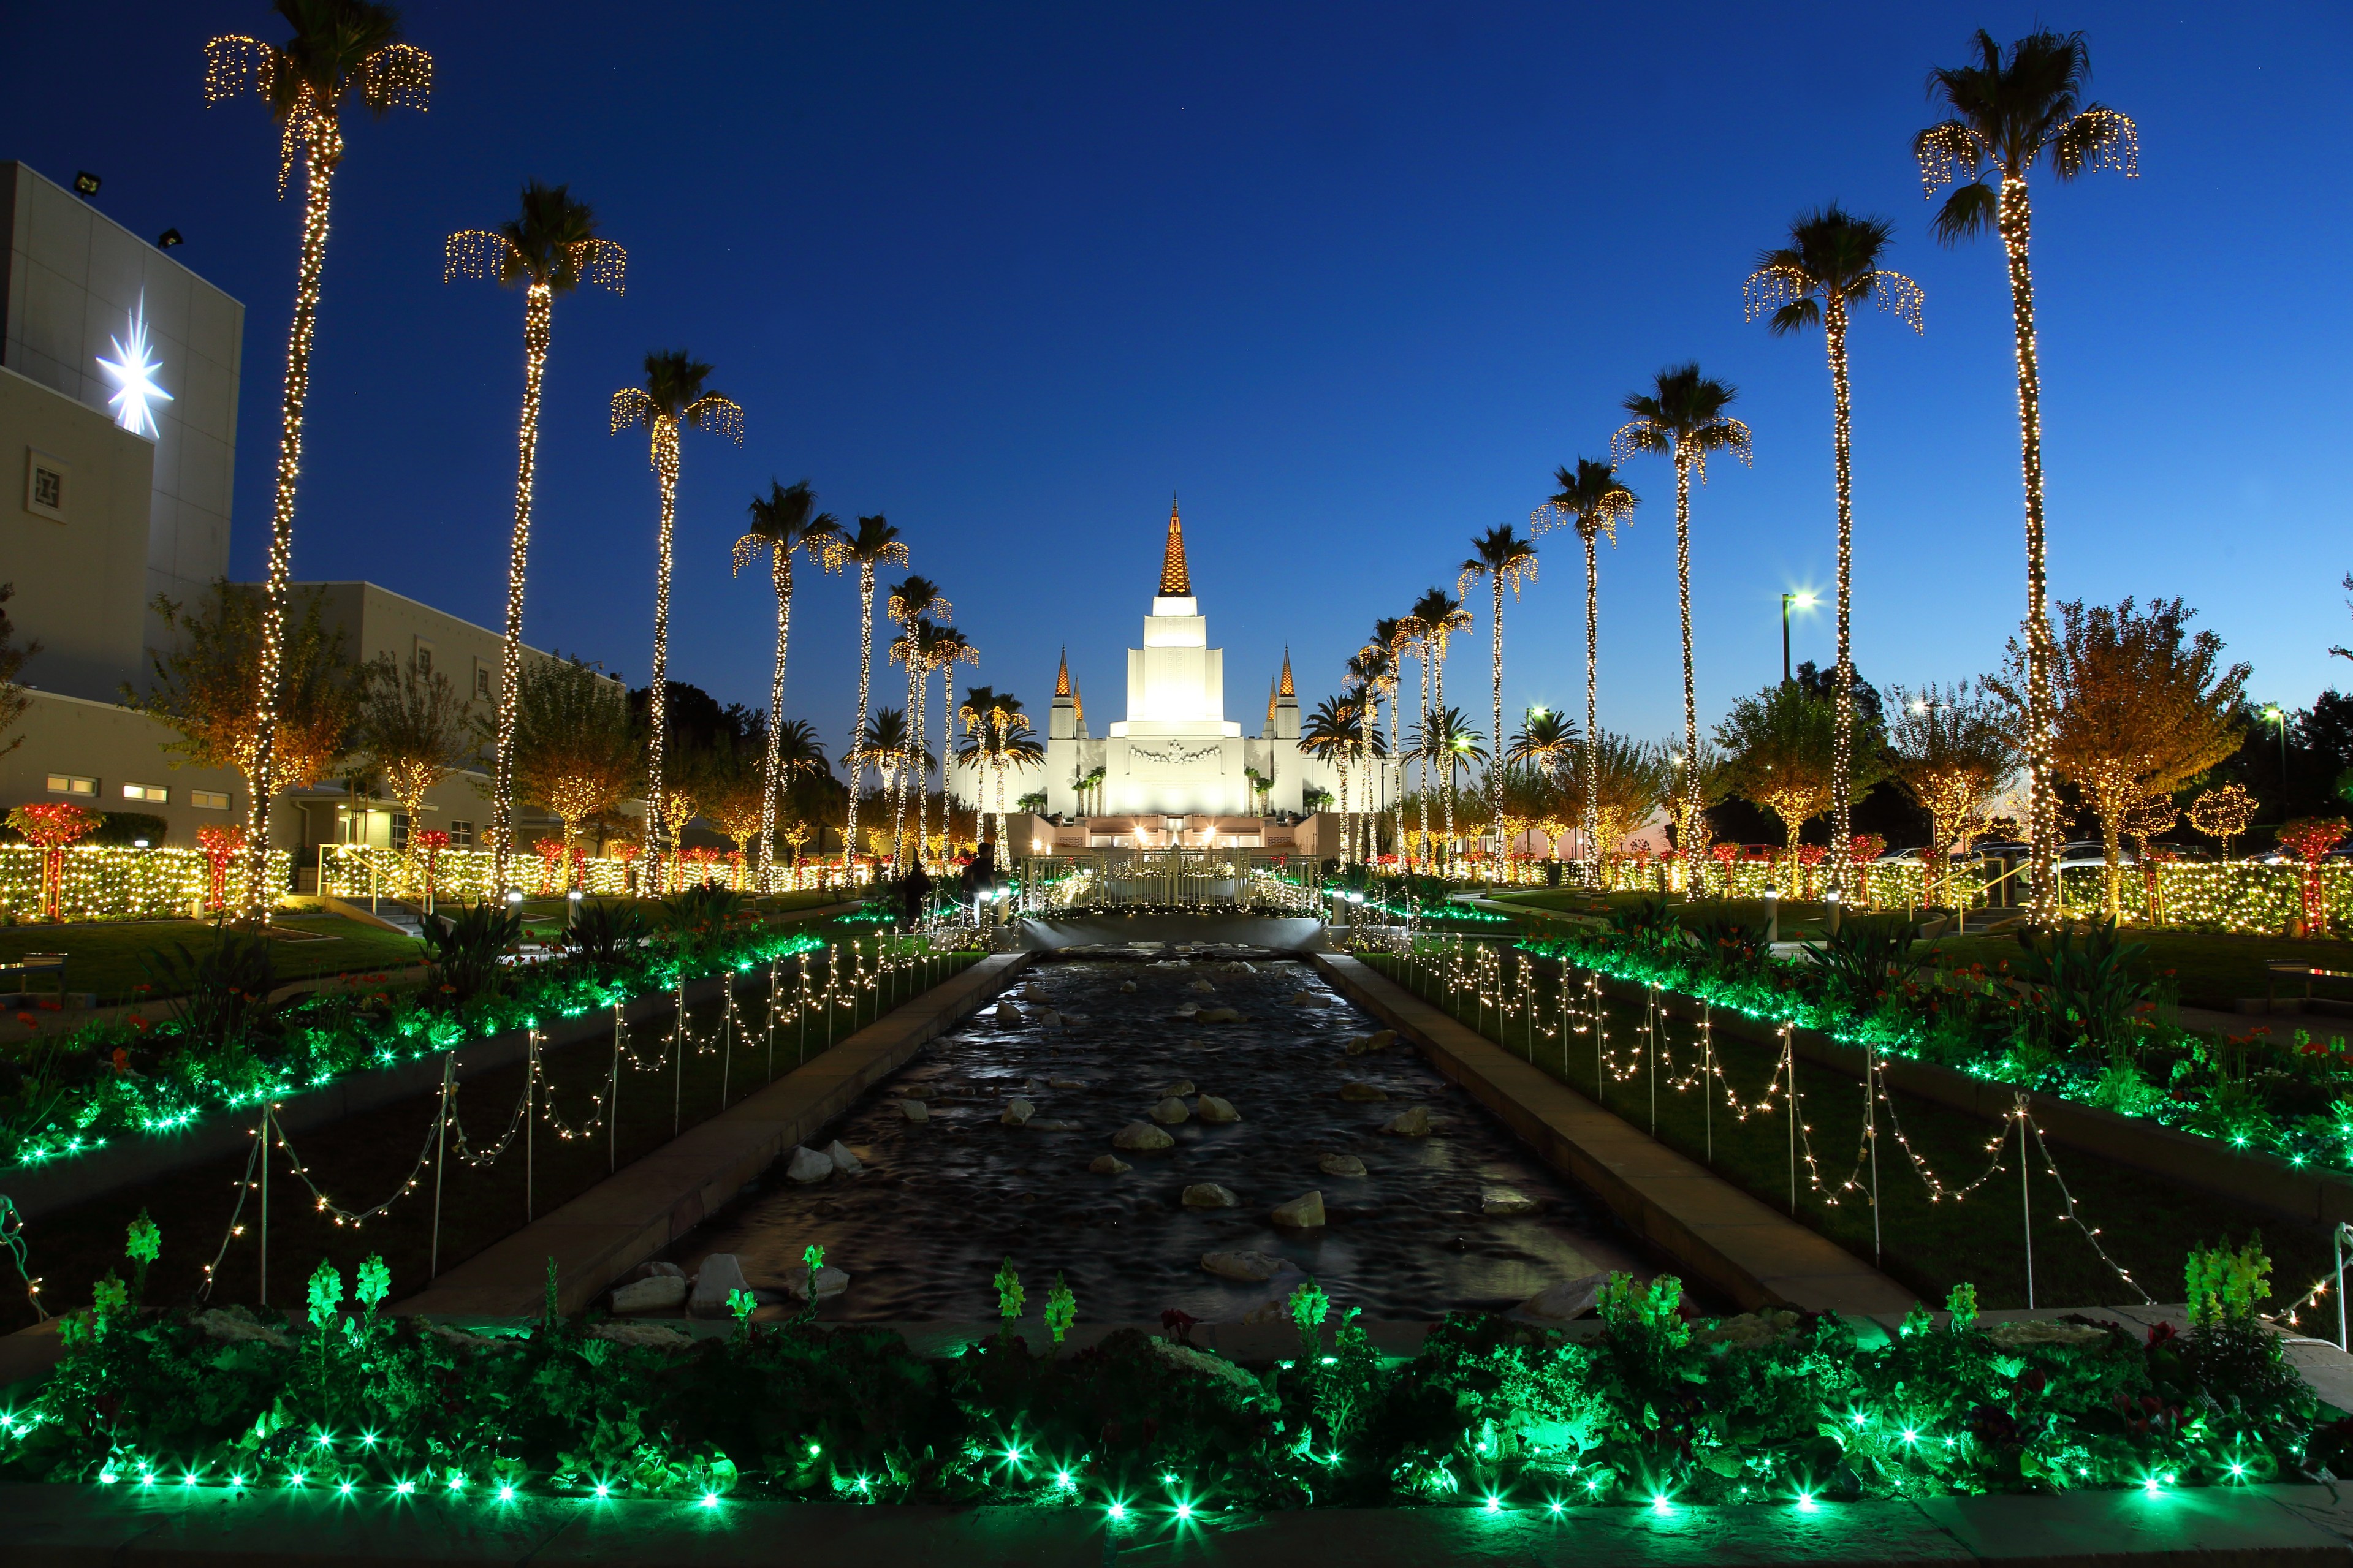 A Mormon temple lined by palm trees is illuminated with lights for the holidays.